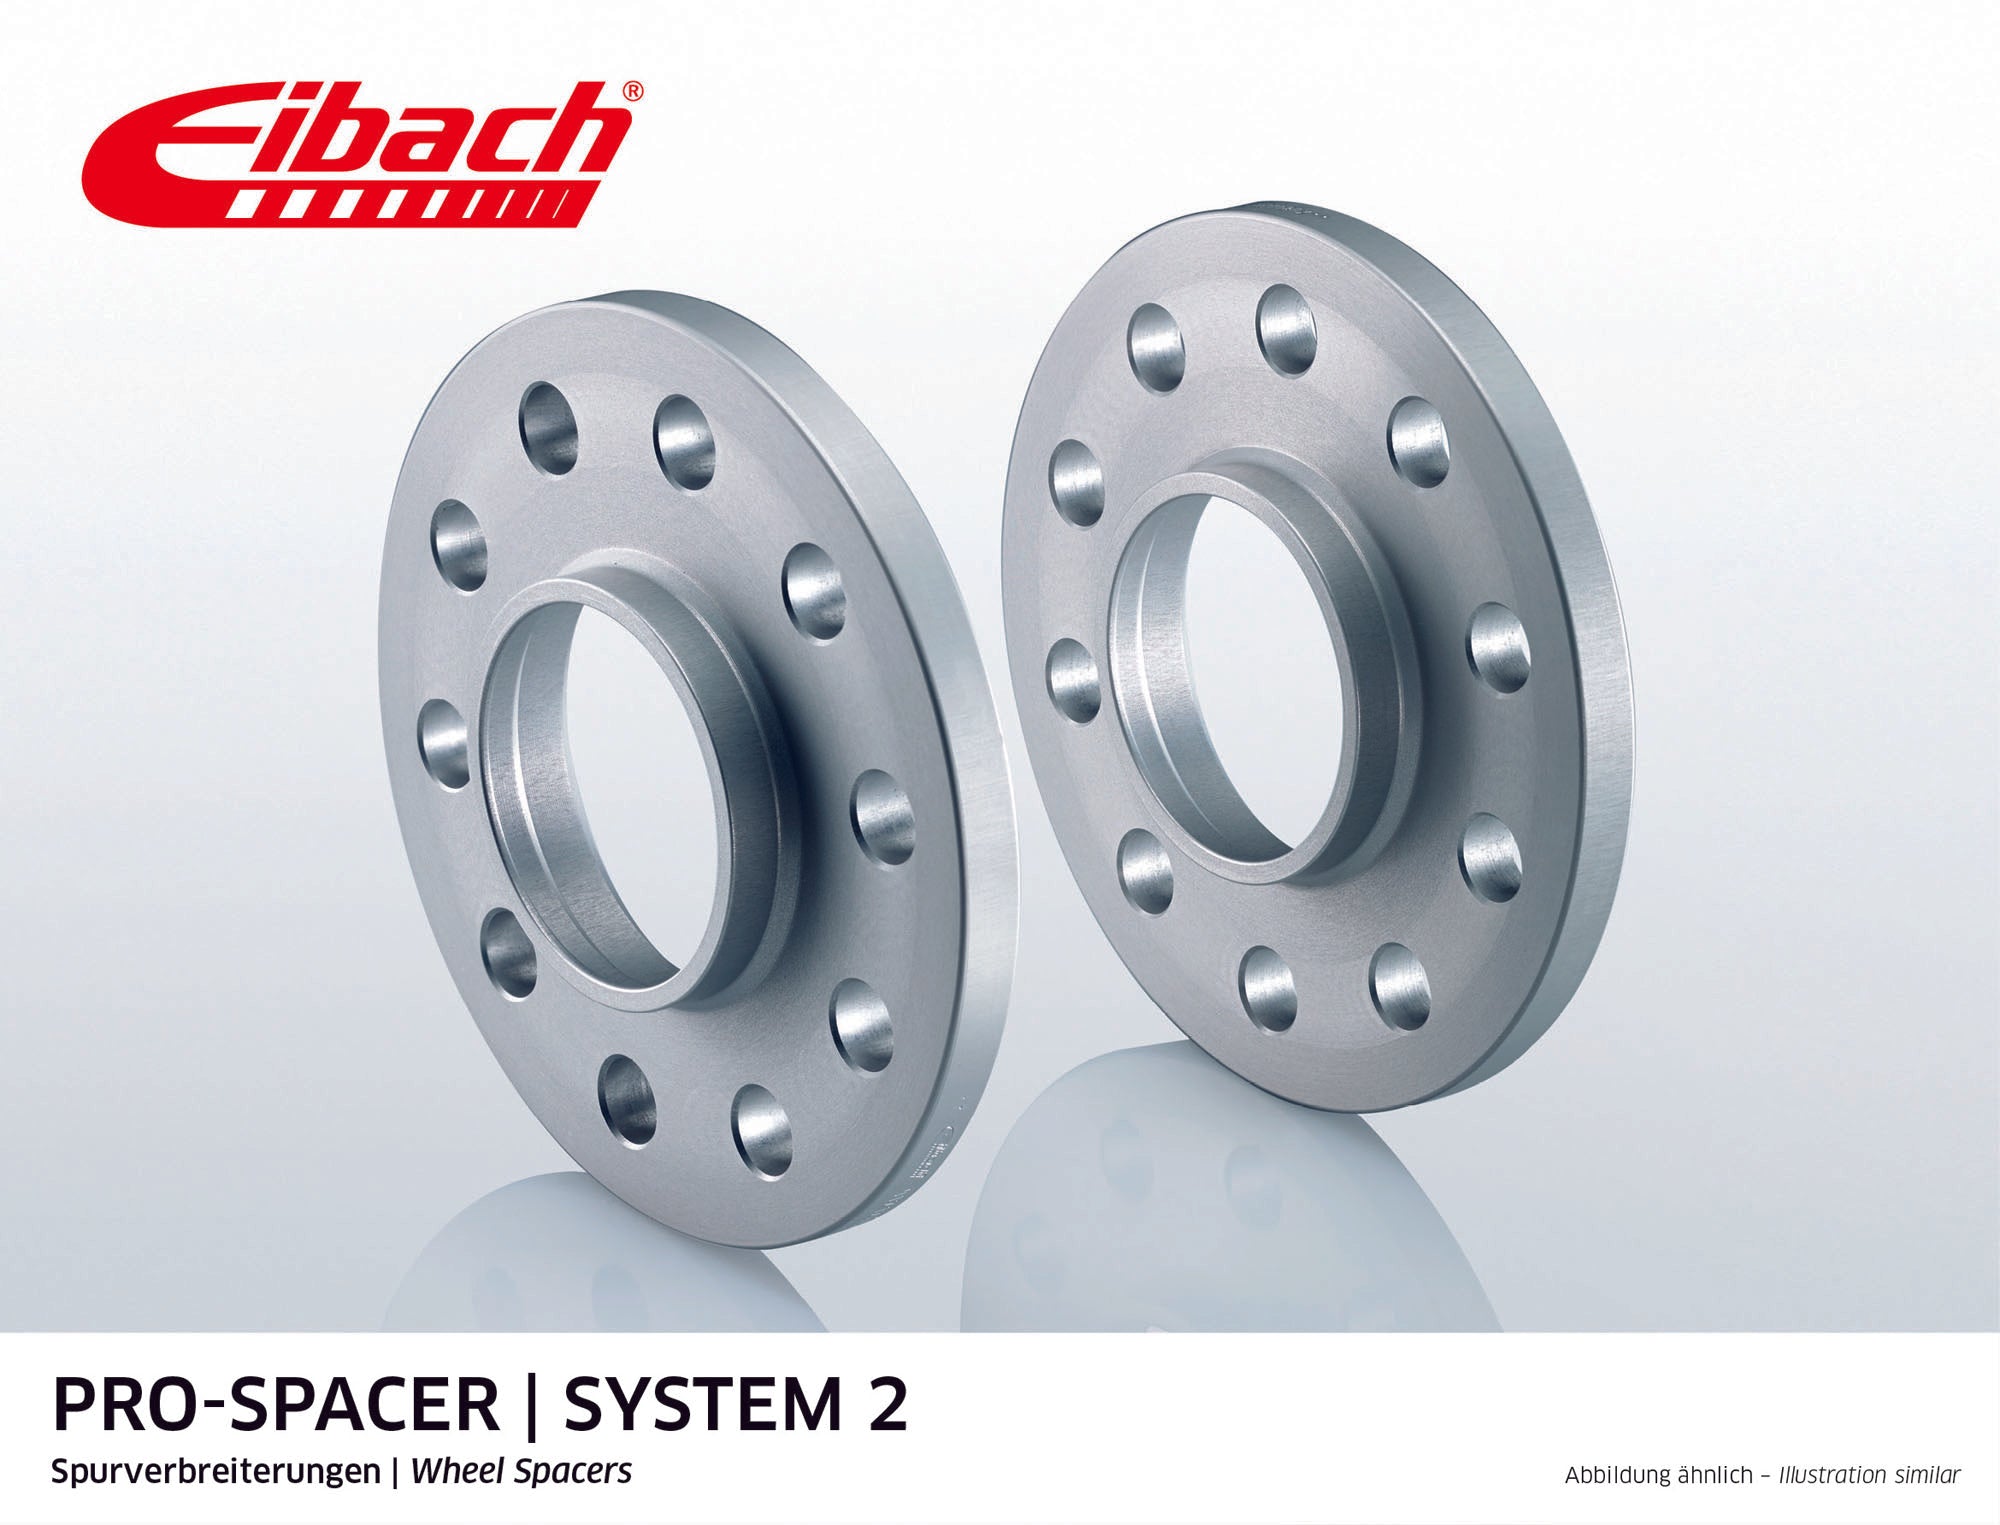 Eibach 18mm Pro-Spacer - Silver Anodized Wheel Spacer 911 2004-12 #S90-2-18-001